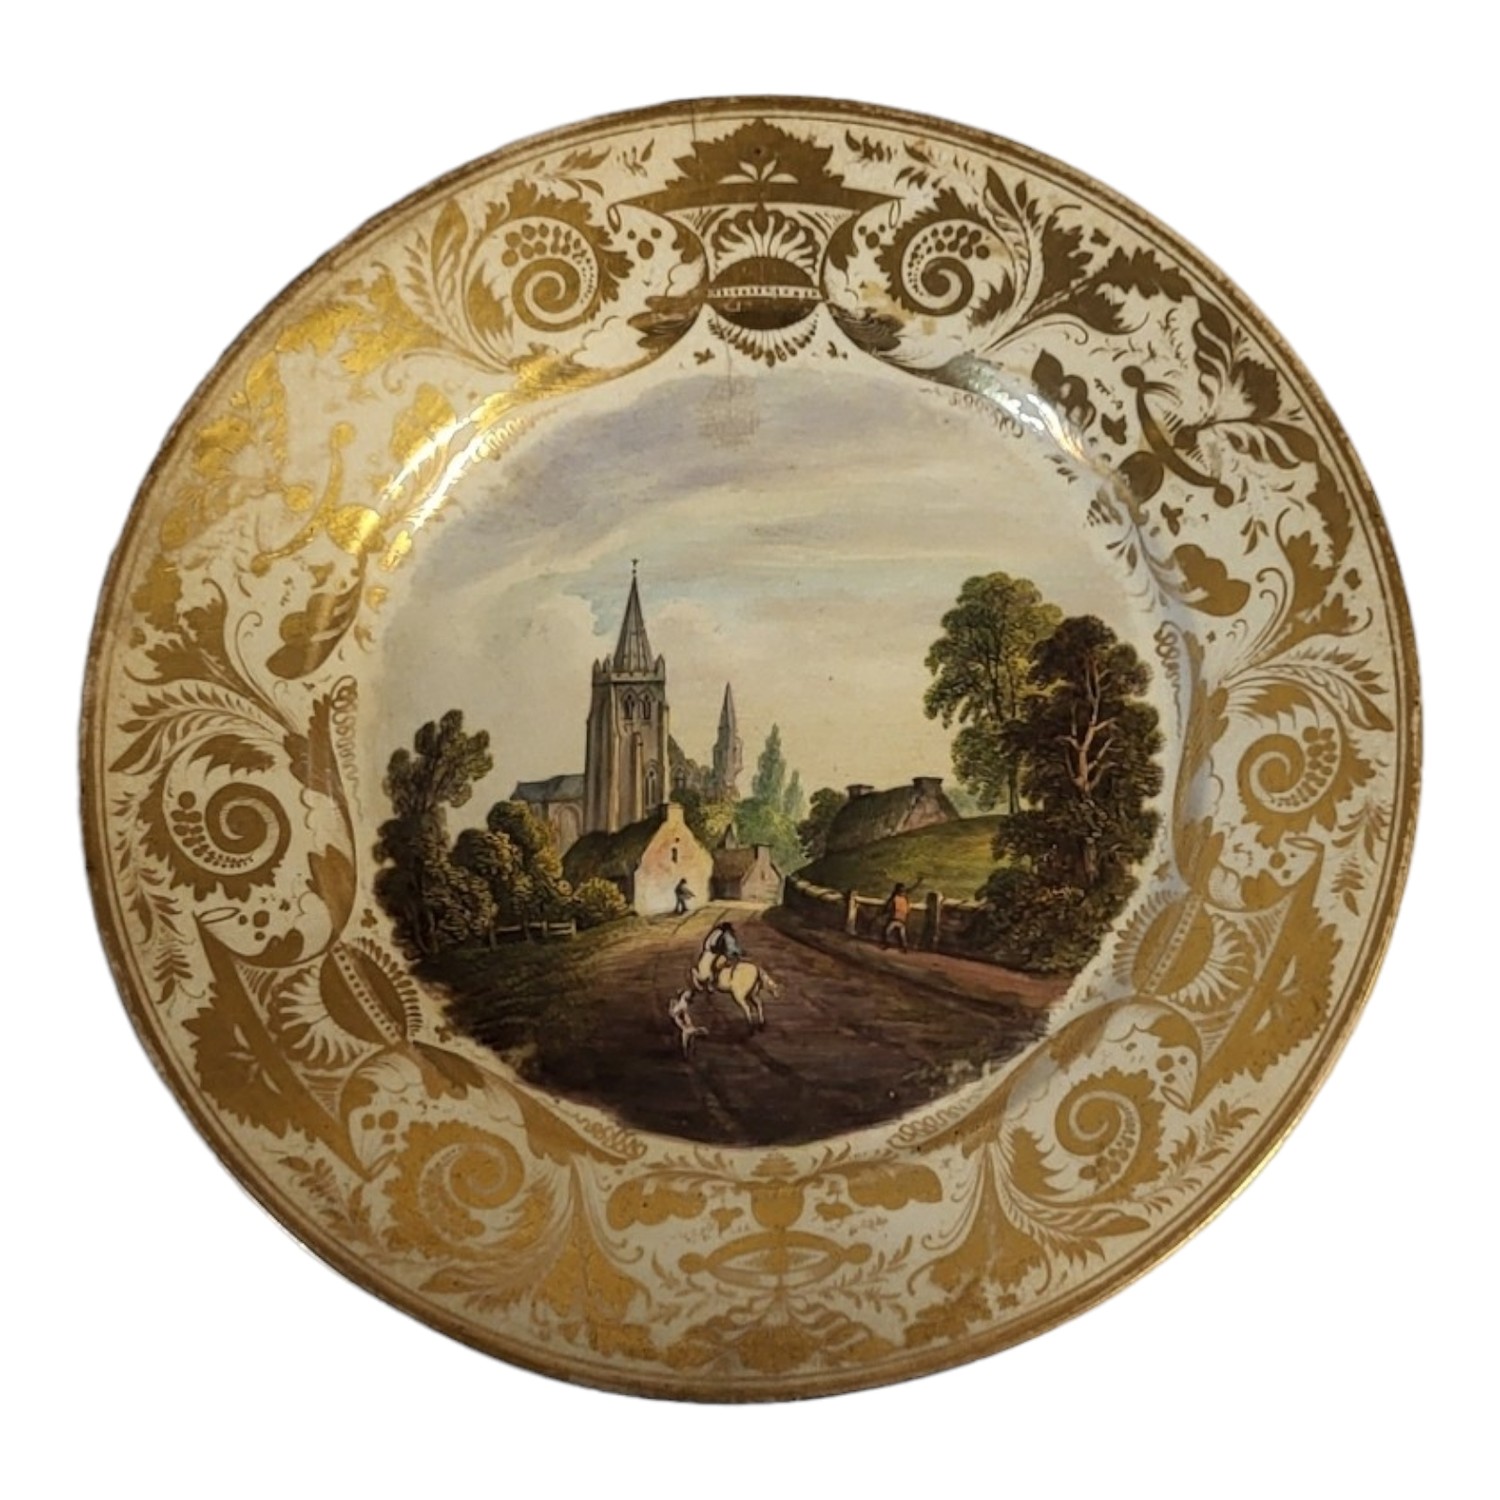 AN 18TH CENTURY DERBY TOPOGRAPHICAL PORCELAIN CABINET PLATE Centrally enamelled with a view near - Image 3 of 7